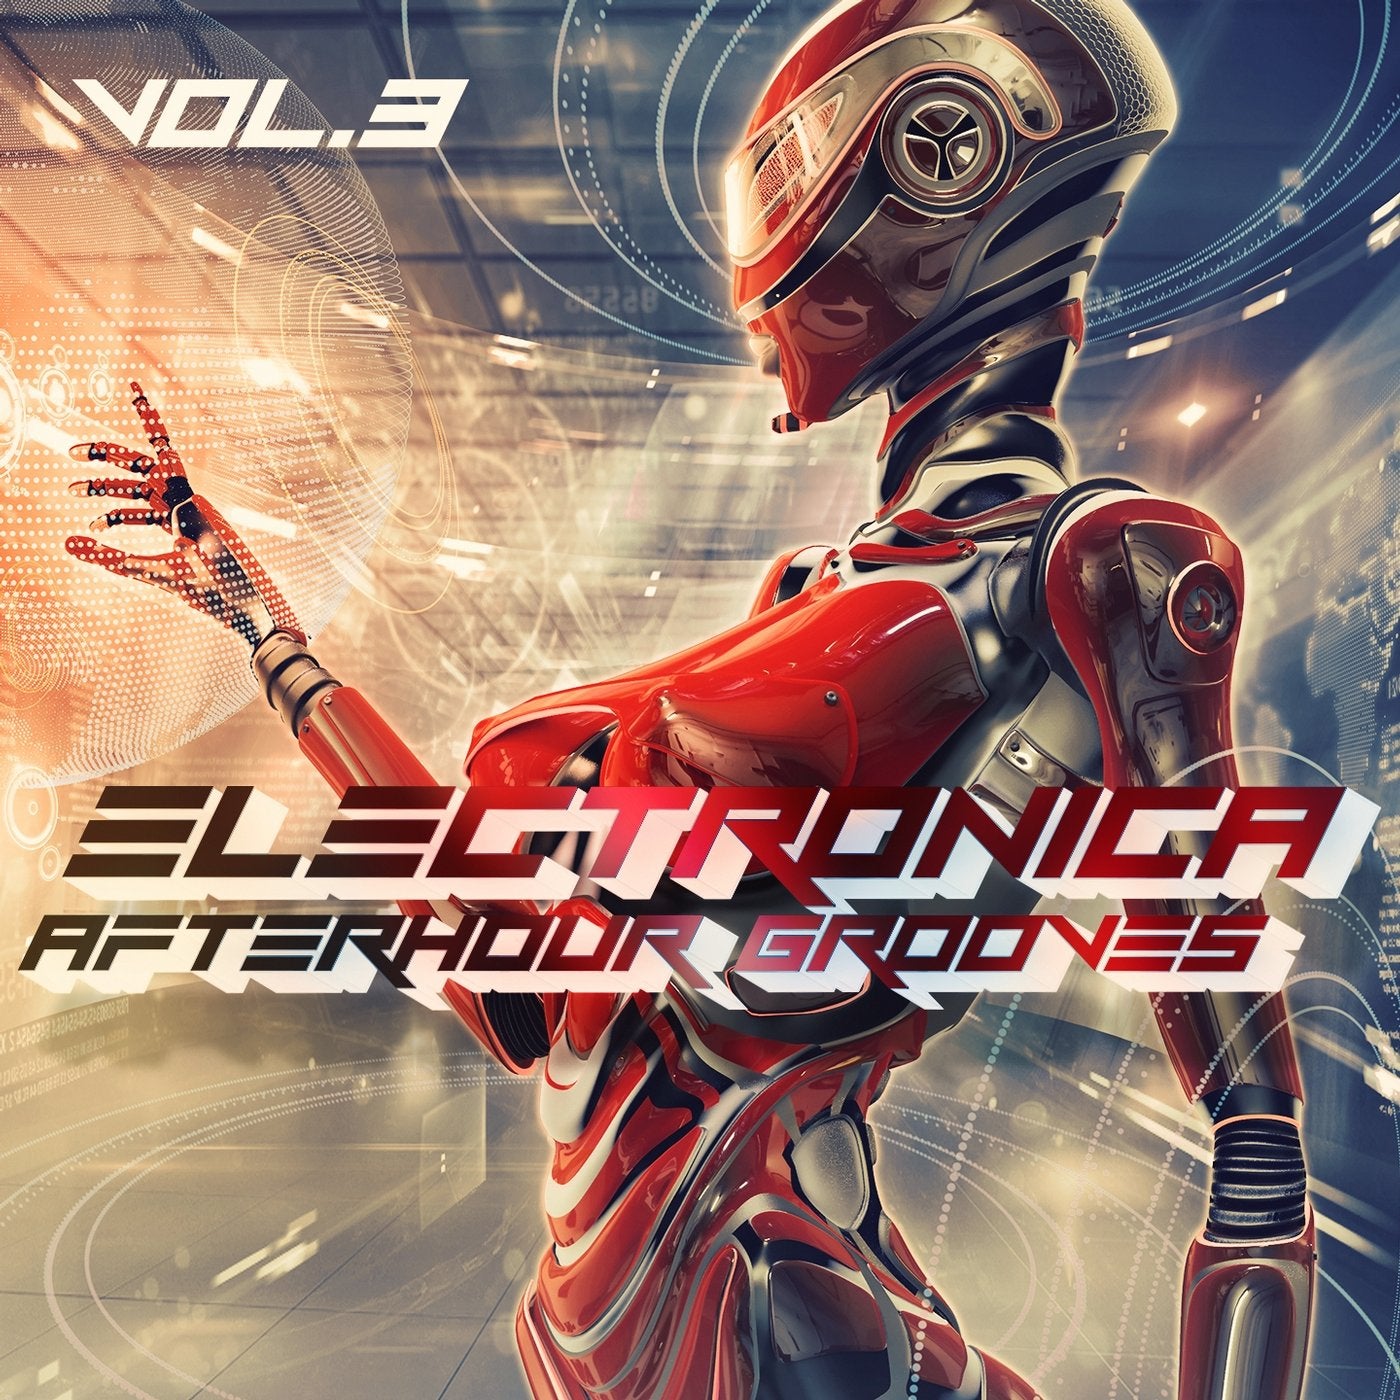 Electronica Afterhour Grooves Vol.3